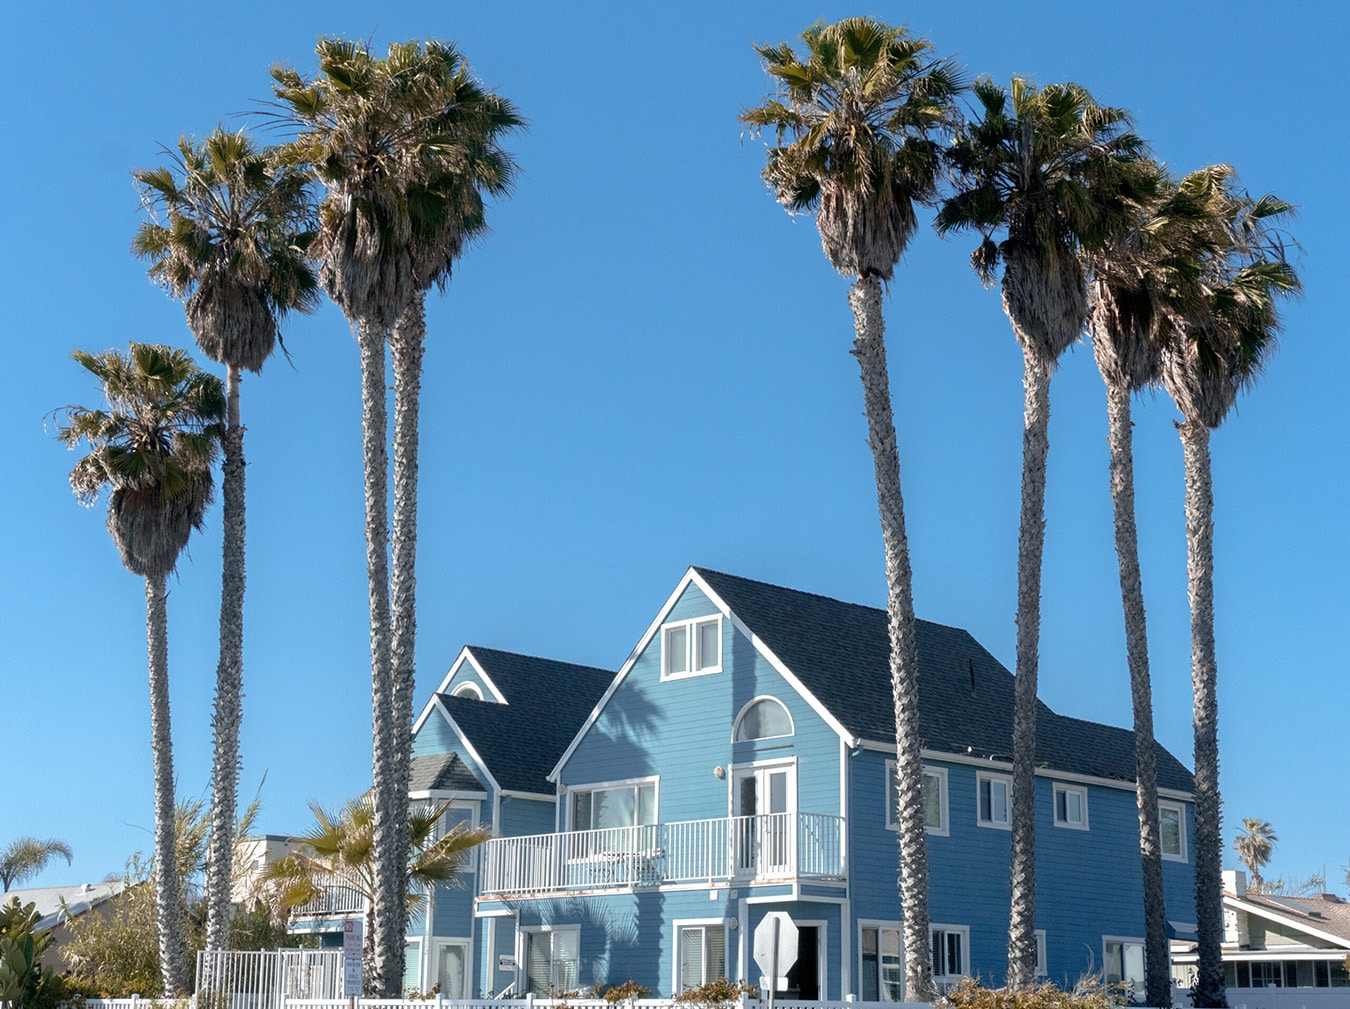 Tall palm trees in front of large blue house